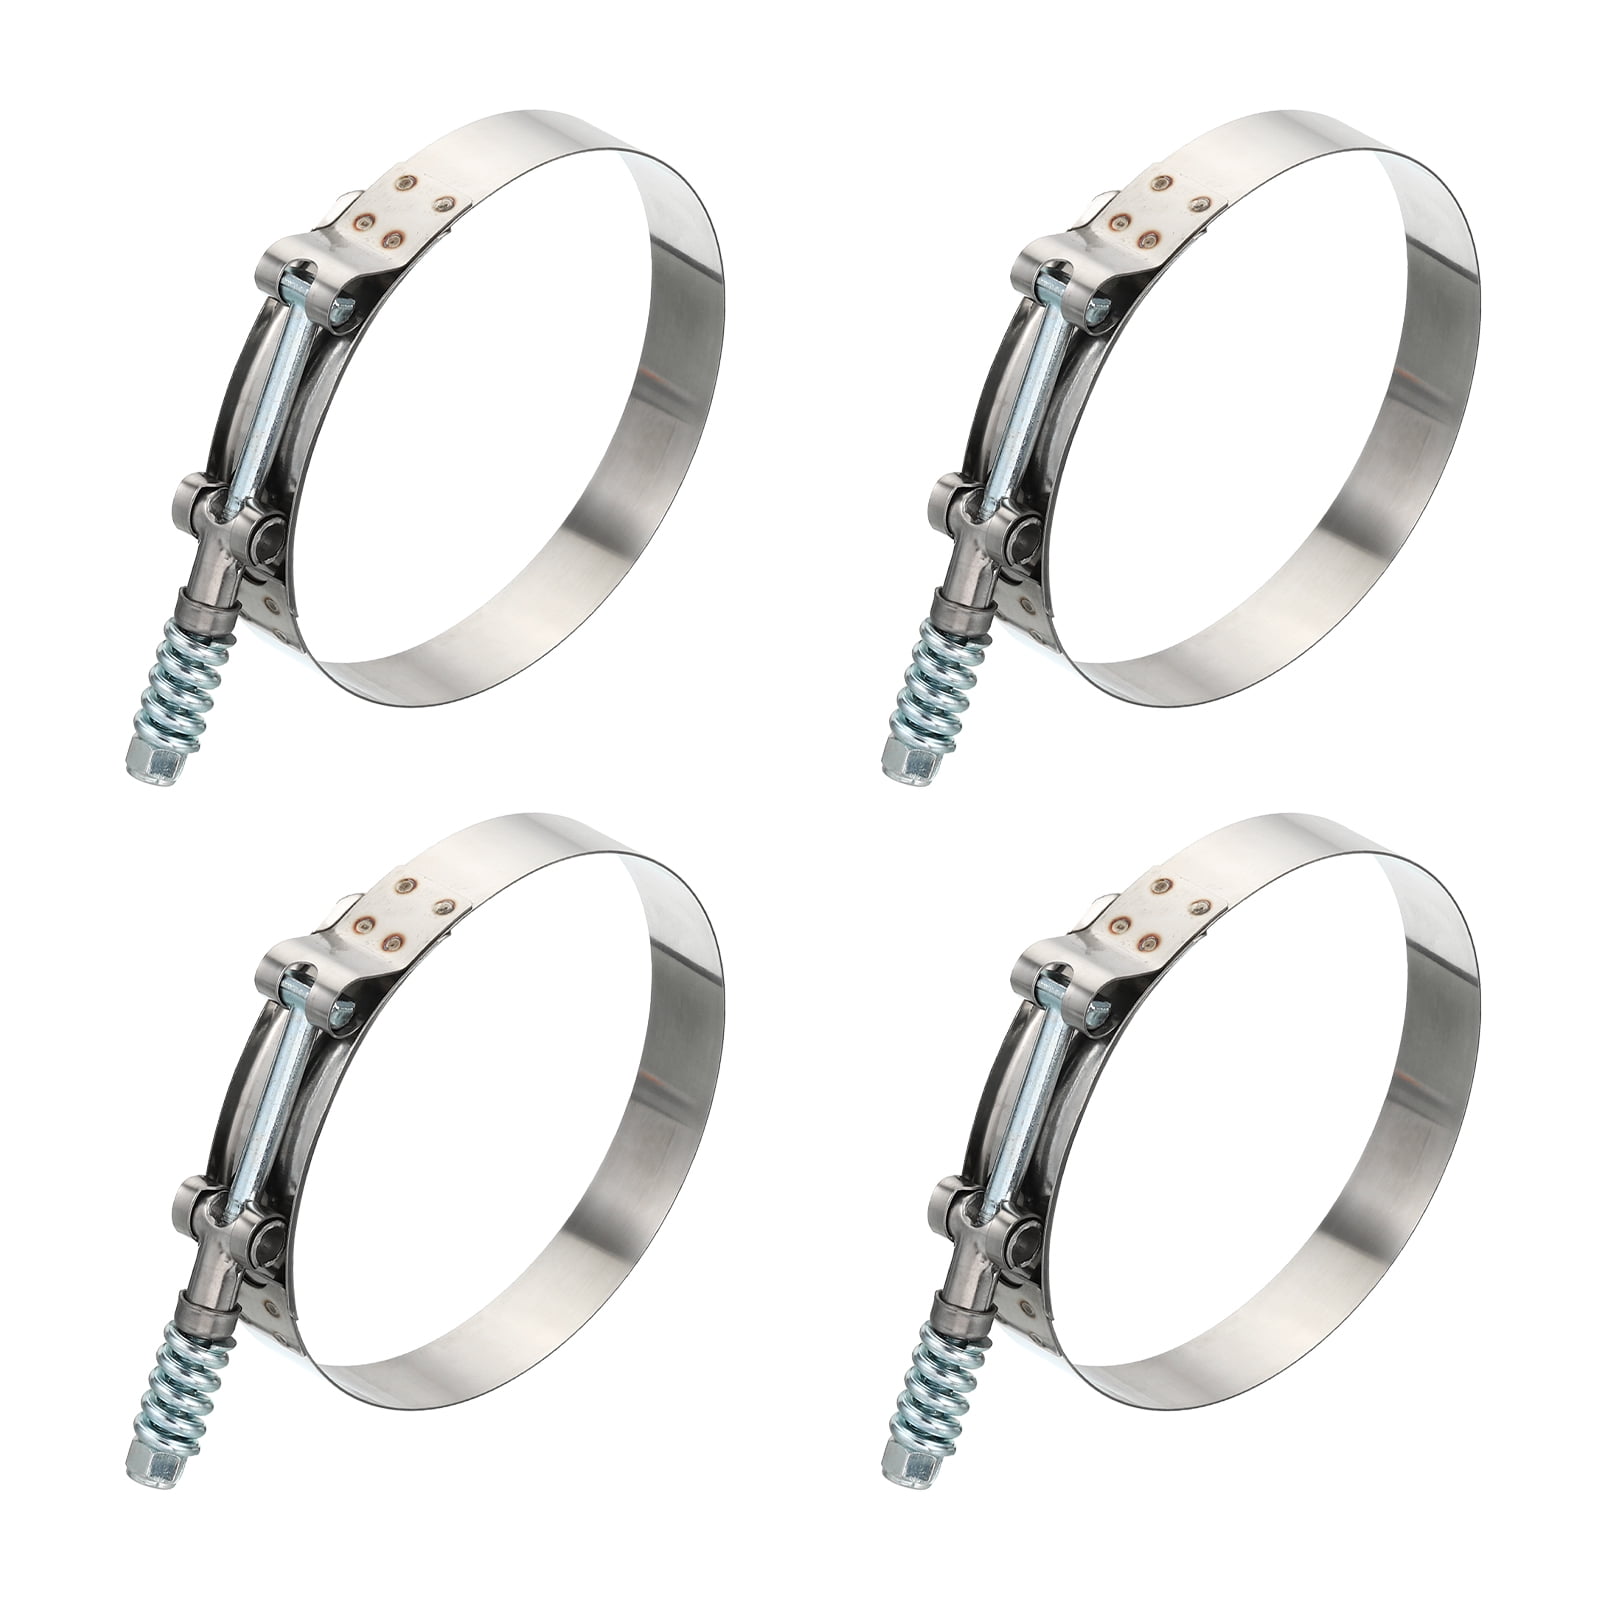 Uxcell T-Bolt Hose Clamps with Spring, 4 Pack 304 Stainless Steel